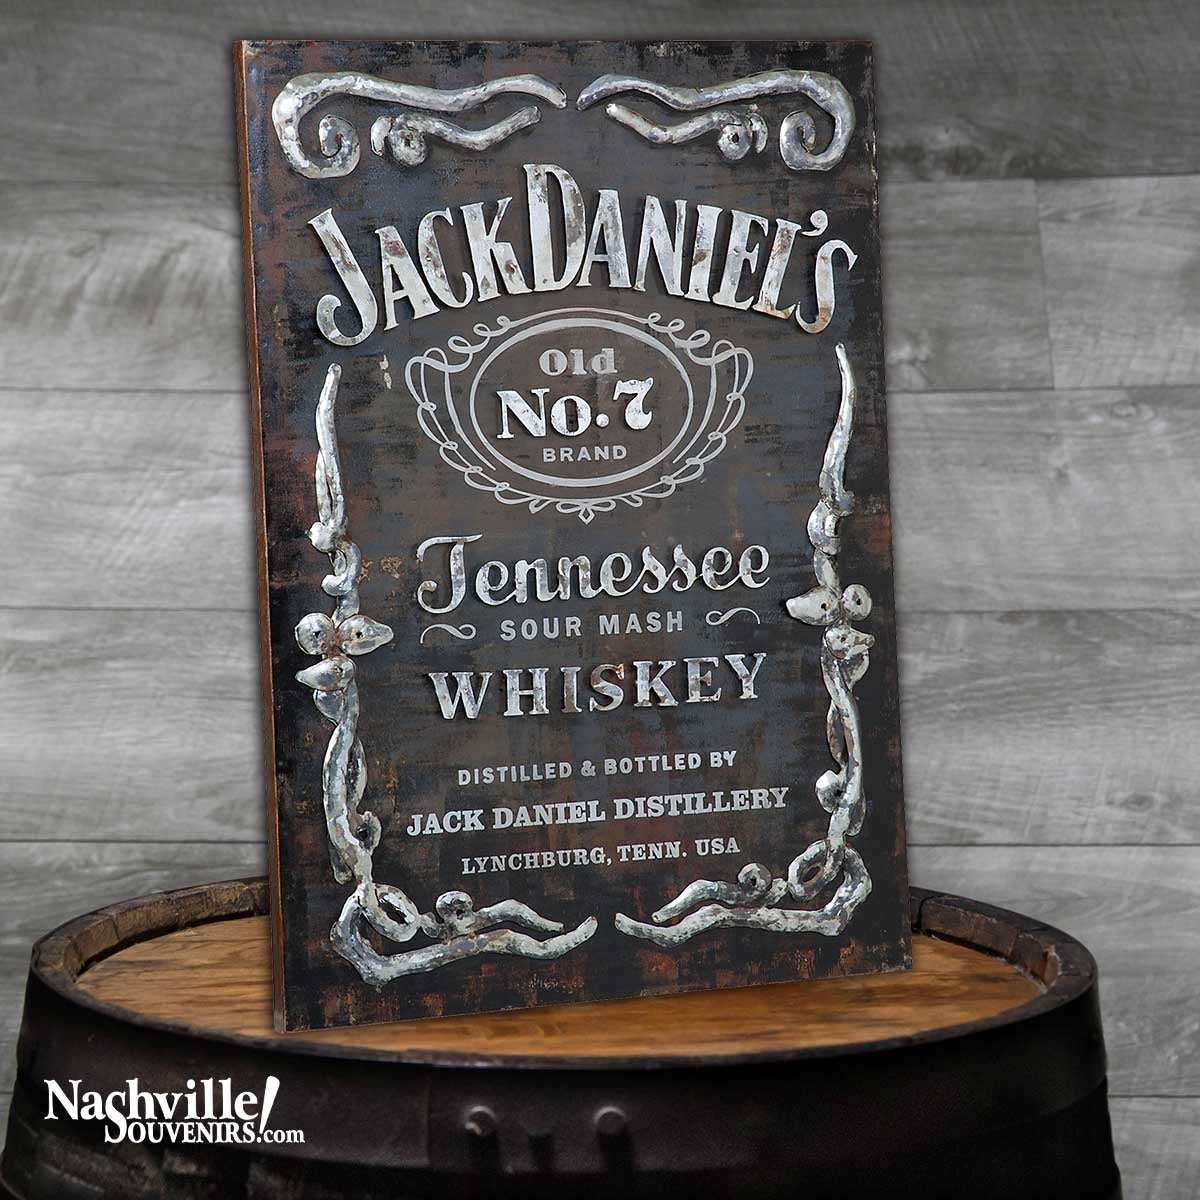 Add some real class to the man cave with this Jack Daniel's Metal Wall Art. Hand crafted out of repurposed steel. And it SHIPS FREE within the continental U.S.!